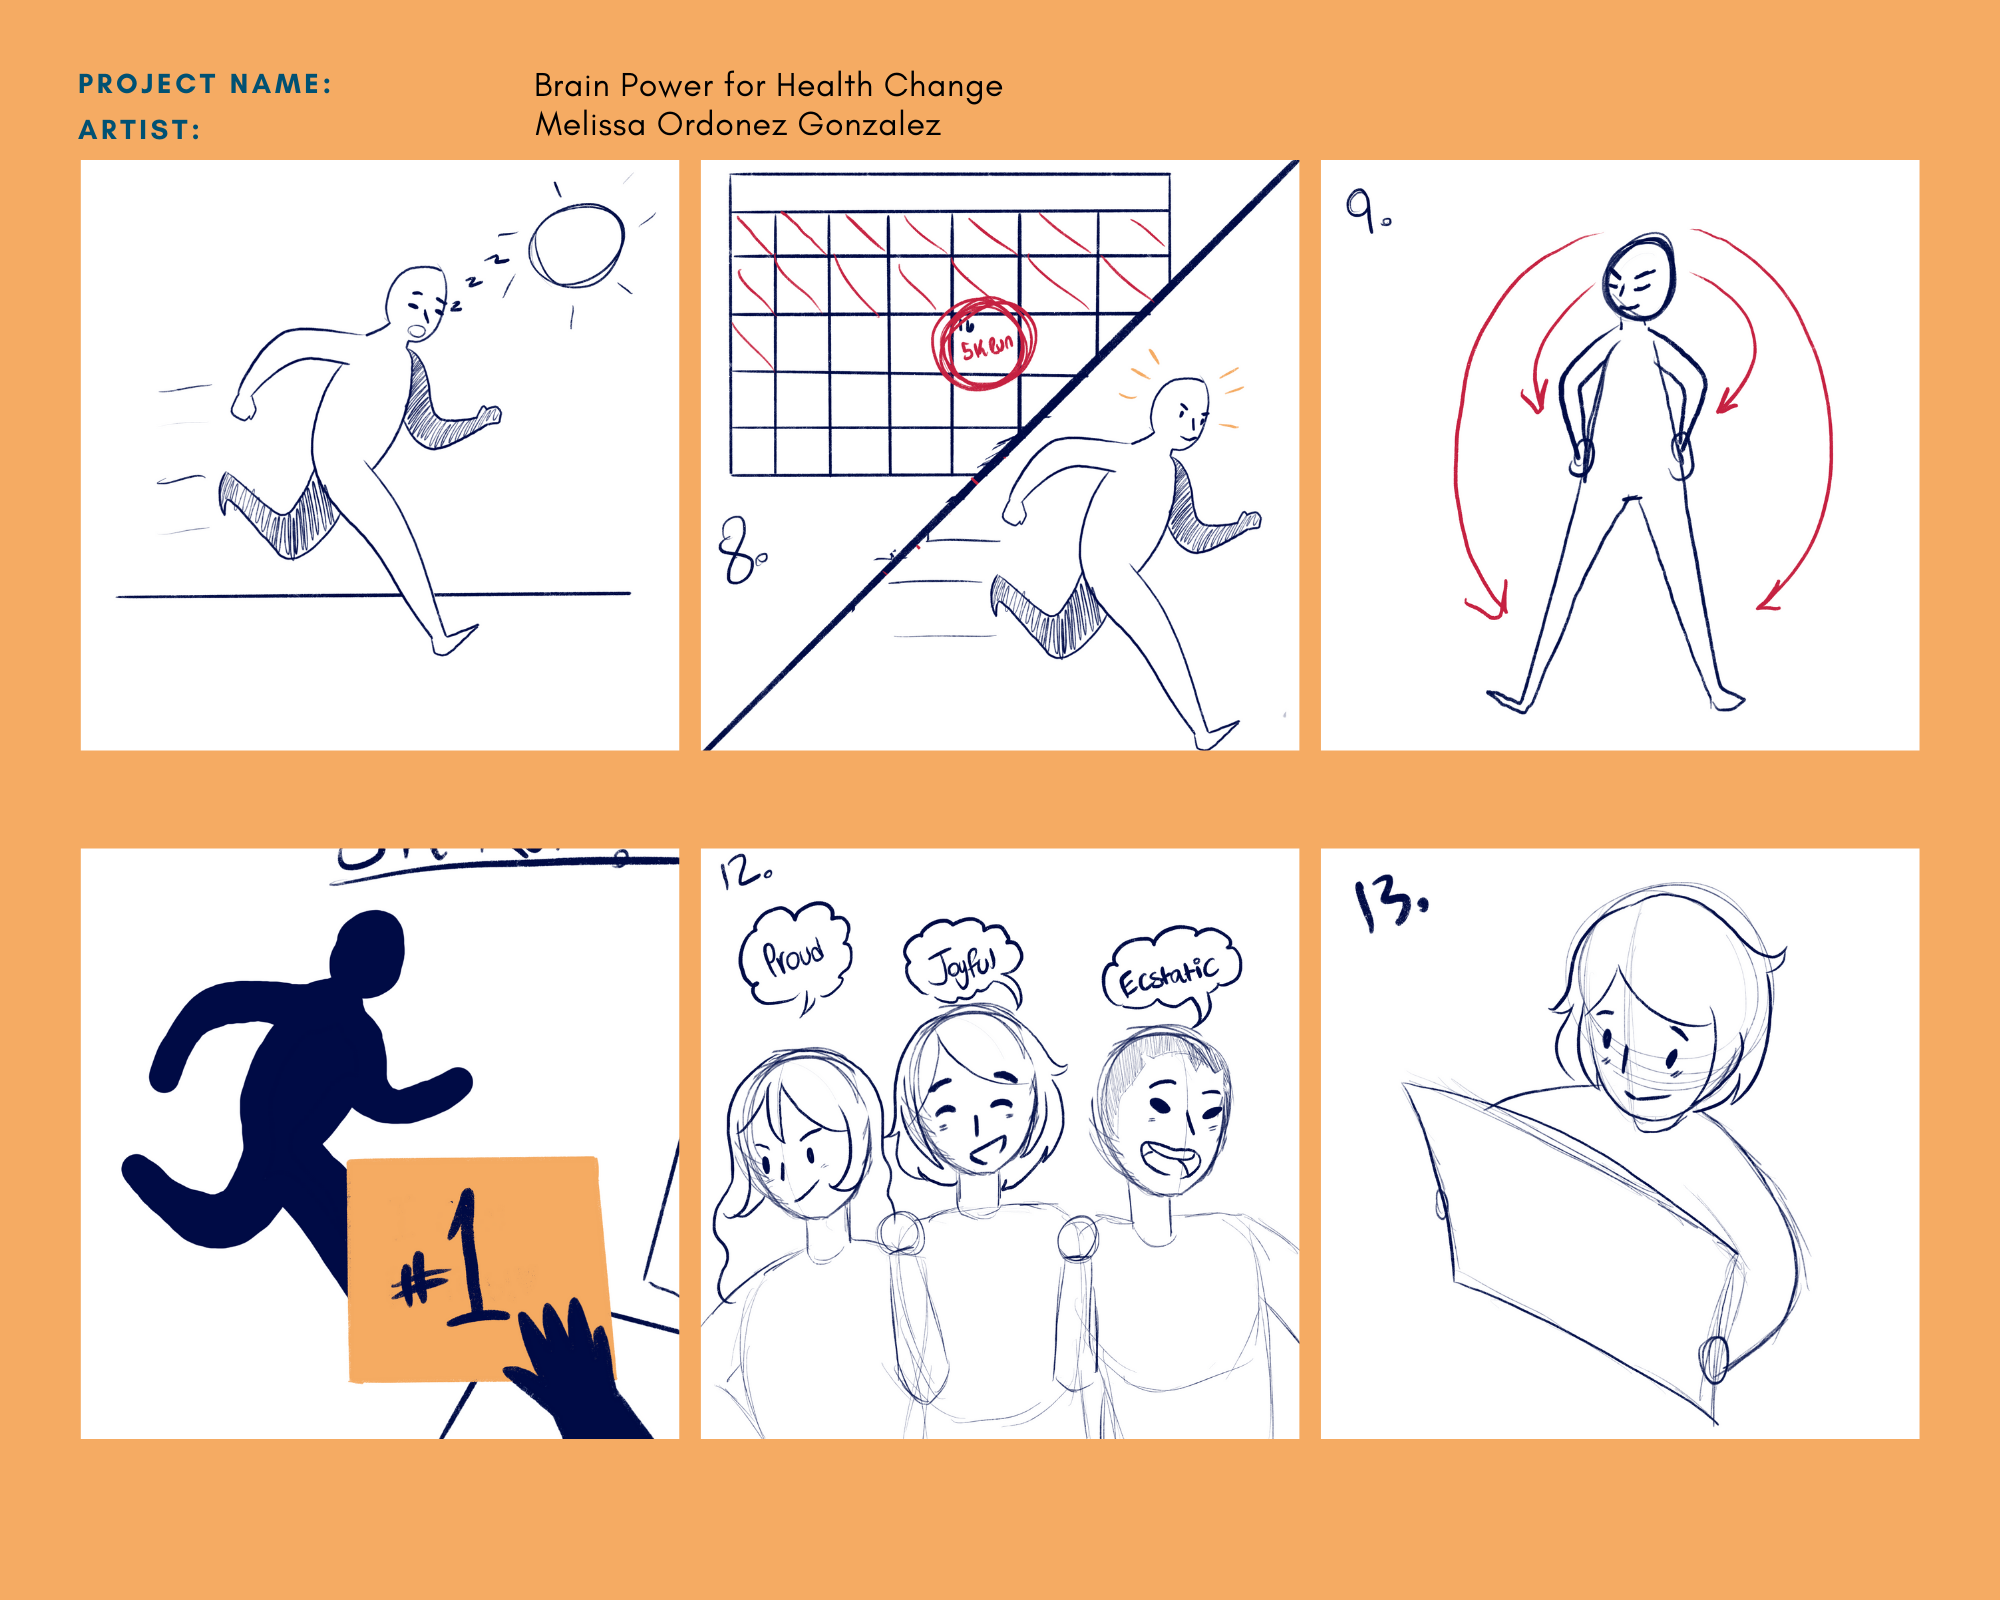 Storyboard by Melissa Ordonez Gonzalez. Rough illustrations for the Lifeology course on Brain Power